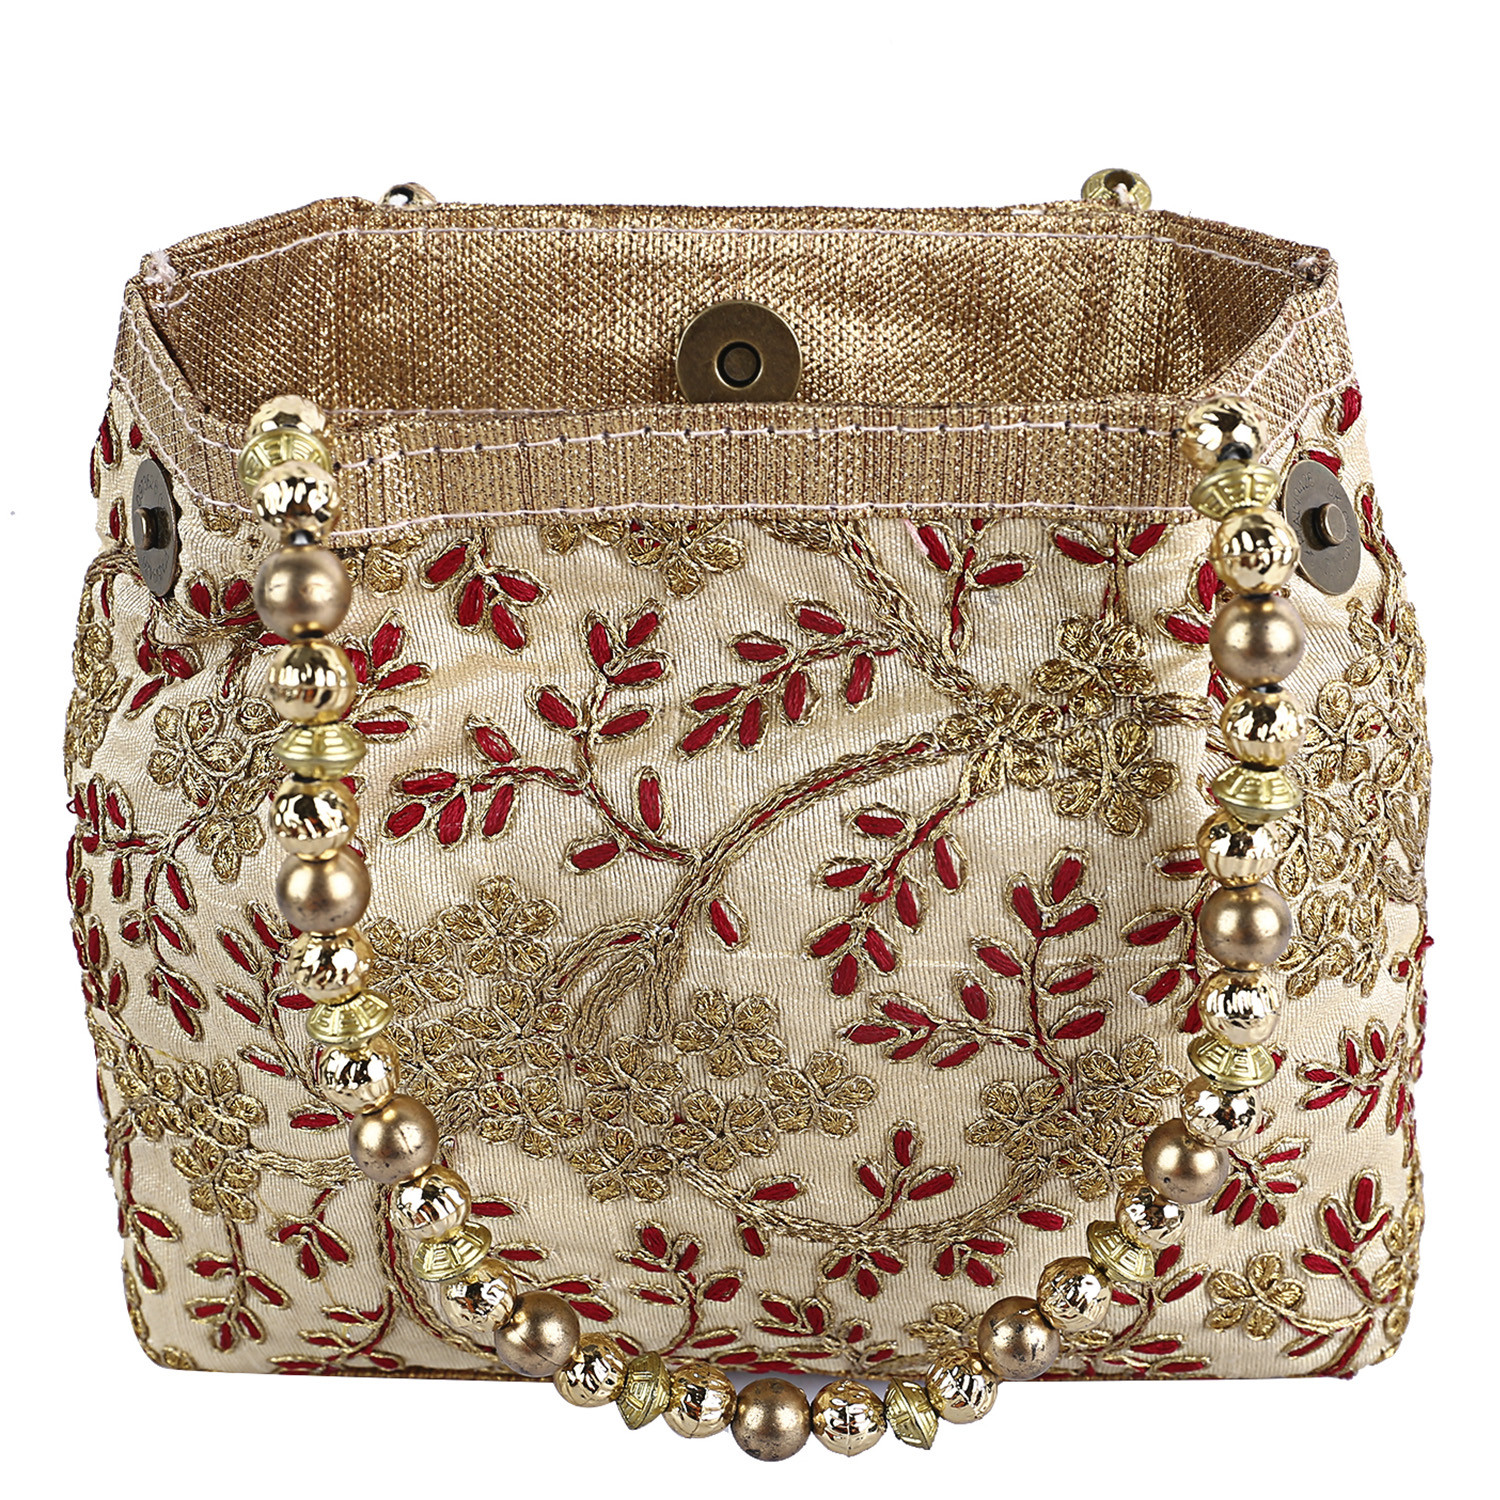 Kuber Industries Attractive Embroidery Polyester Hand Purse & Artificial Pearls Handle With 3 Magnetic Lock for Woman,Girls (Cream)